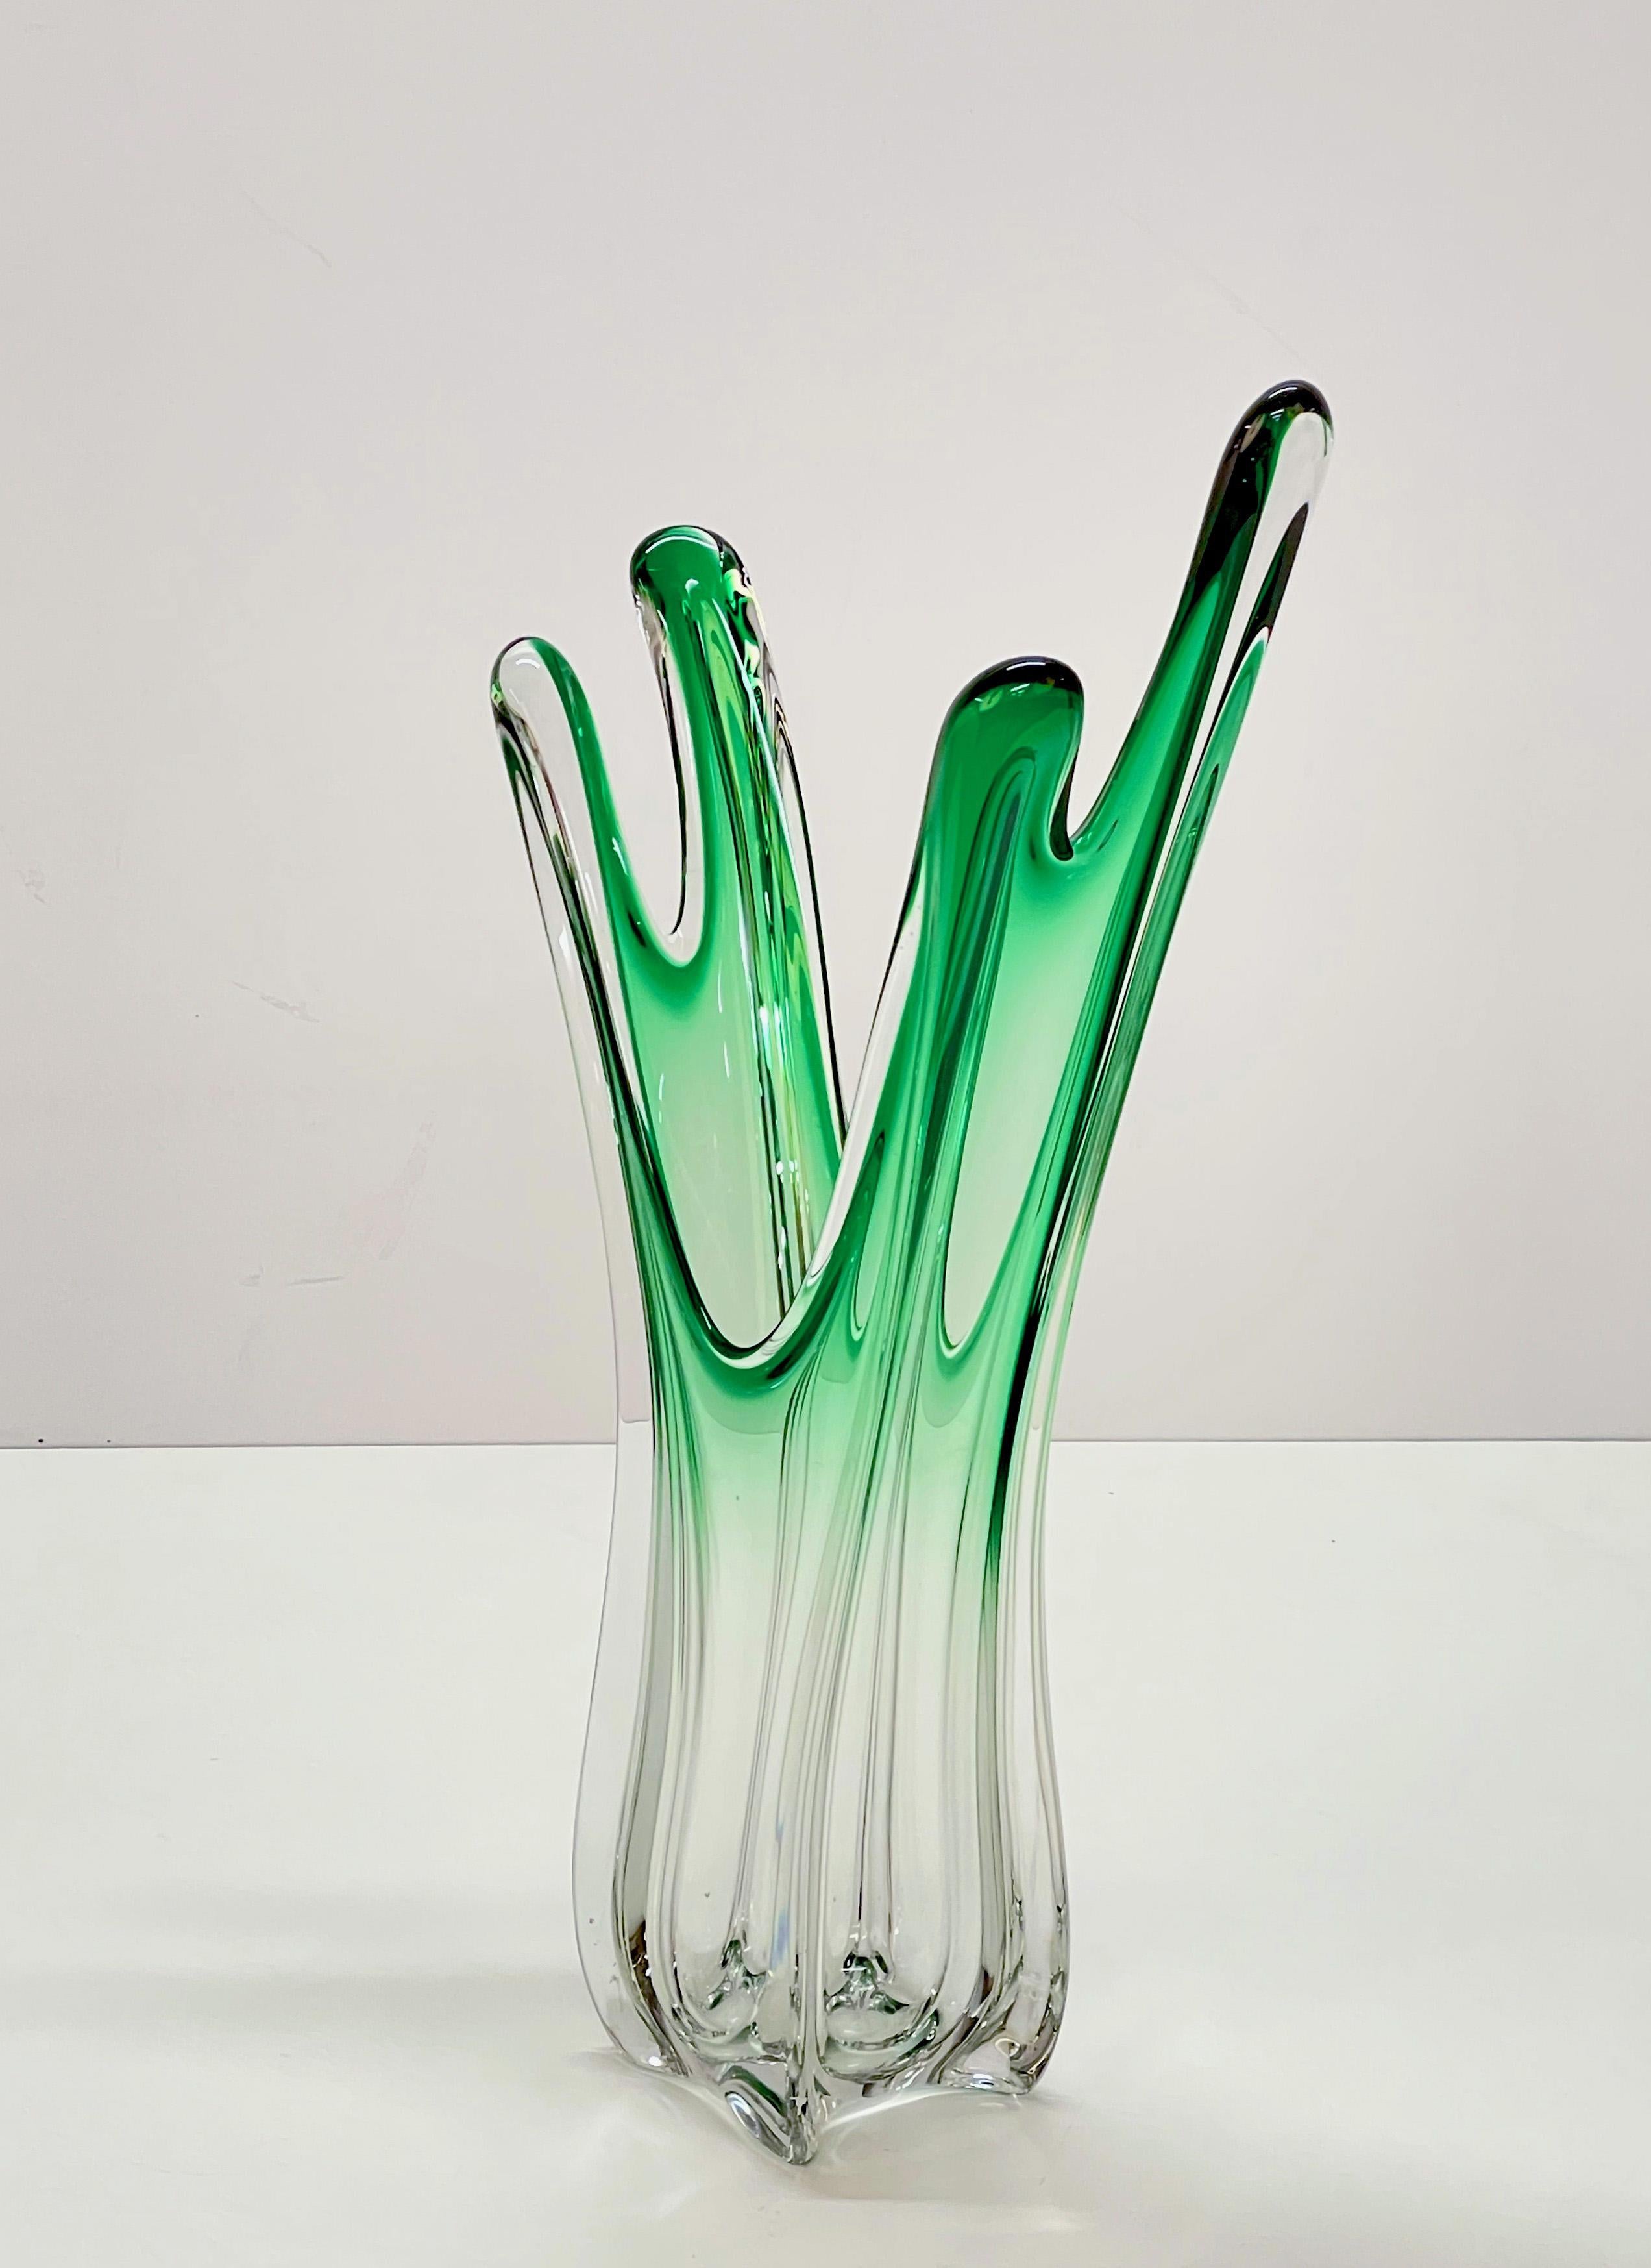 Midcentury Green Art Murano Glass Italian Vase Attributed to F.lli Toso, 1950s For Sale 4